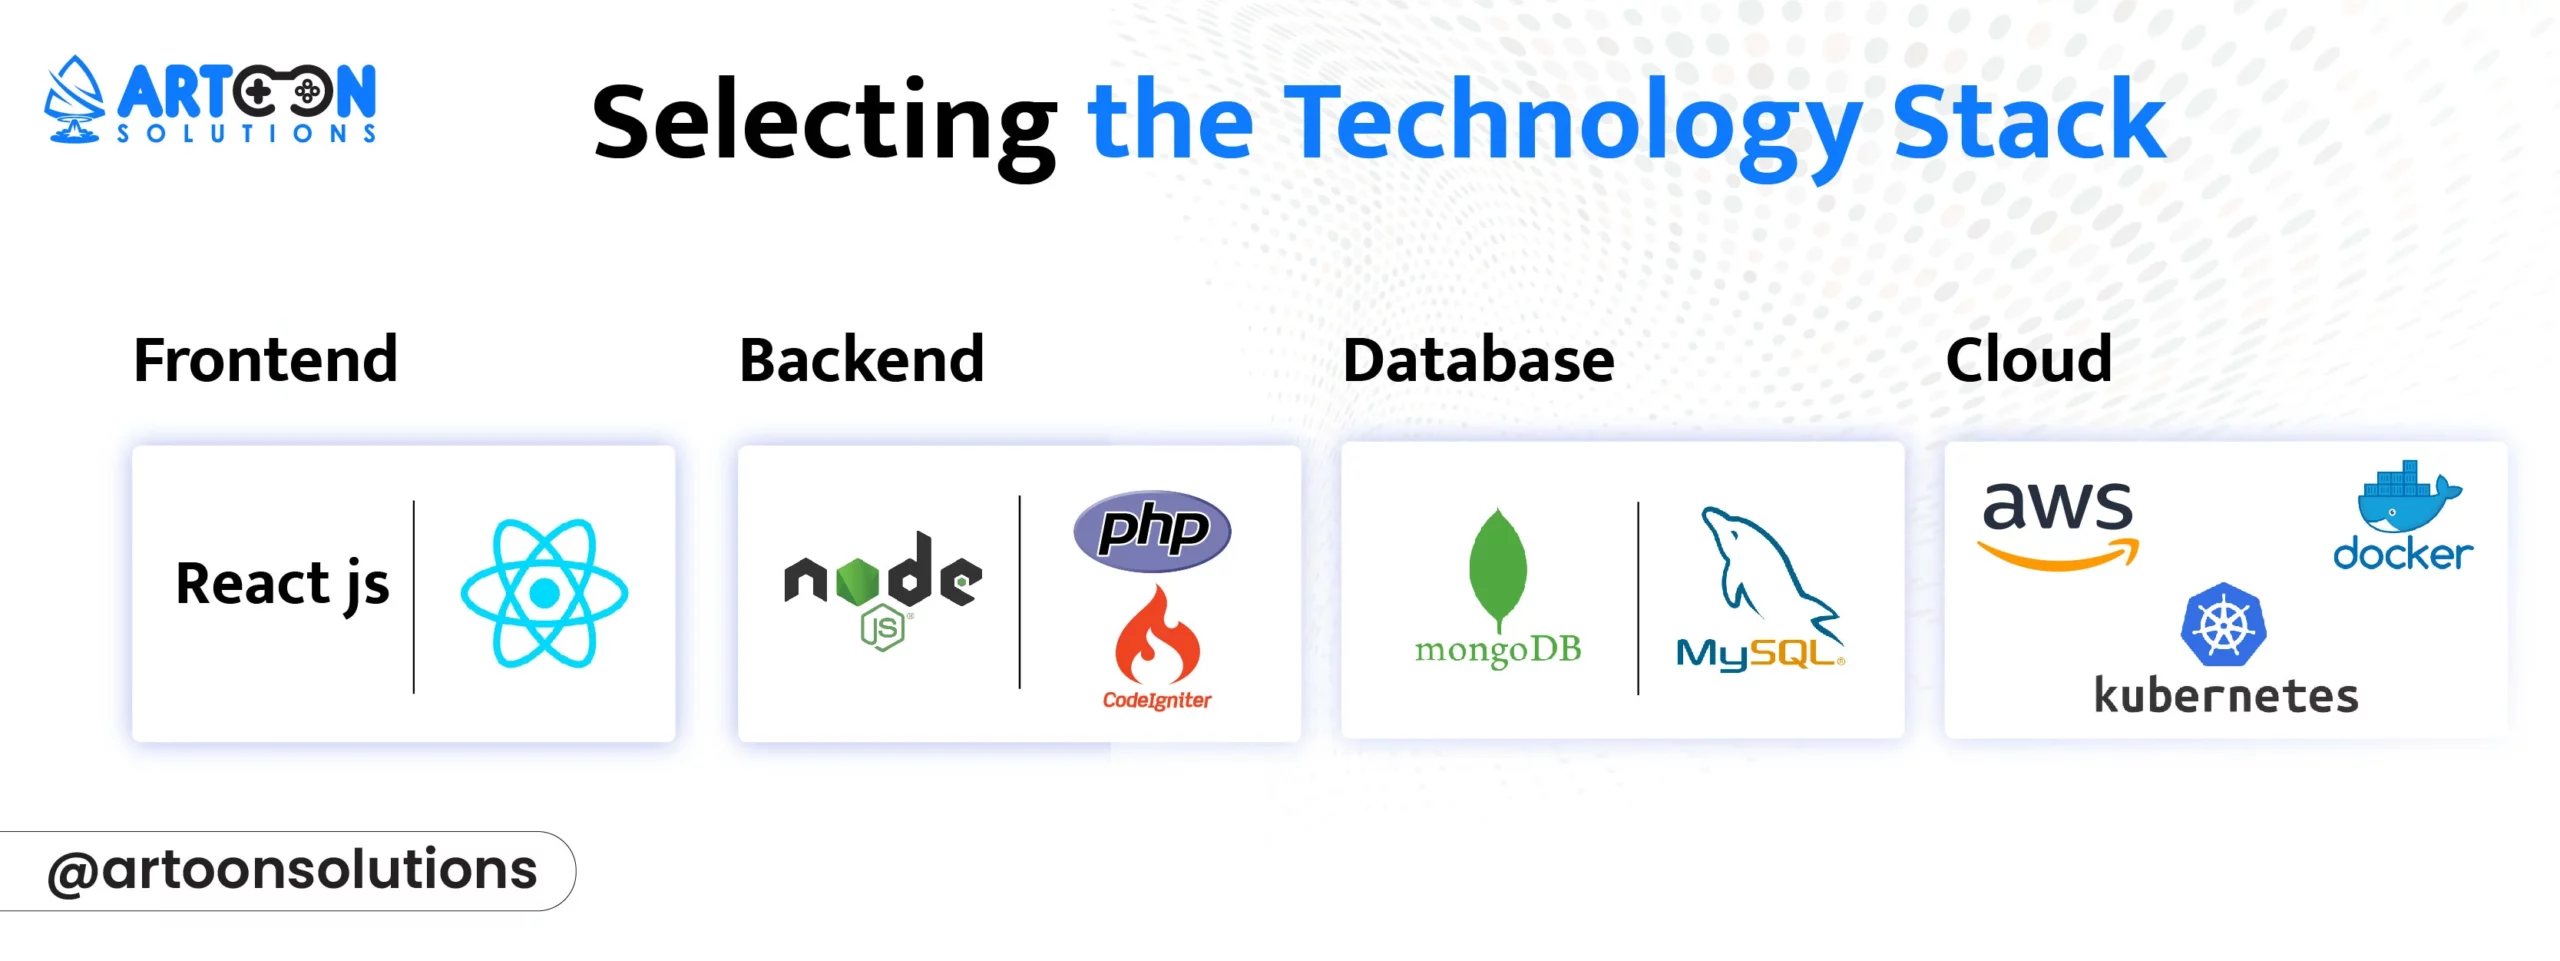 Selecting the Technology Stack